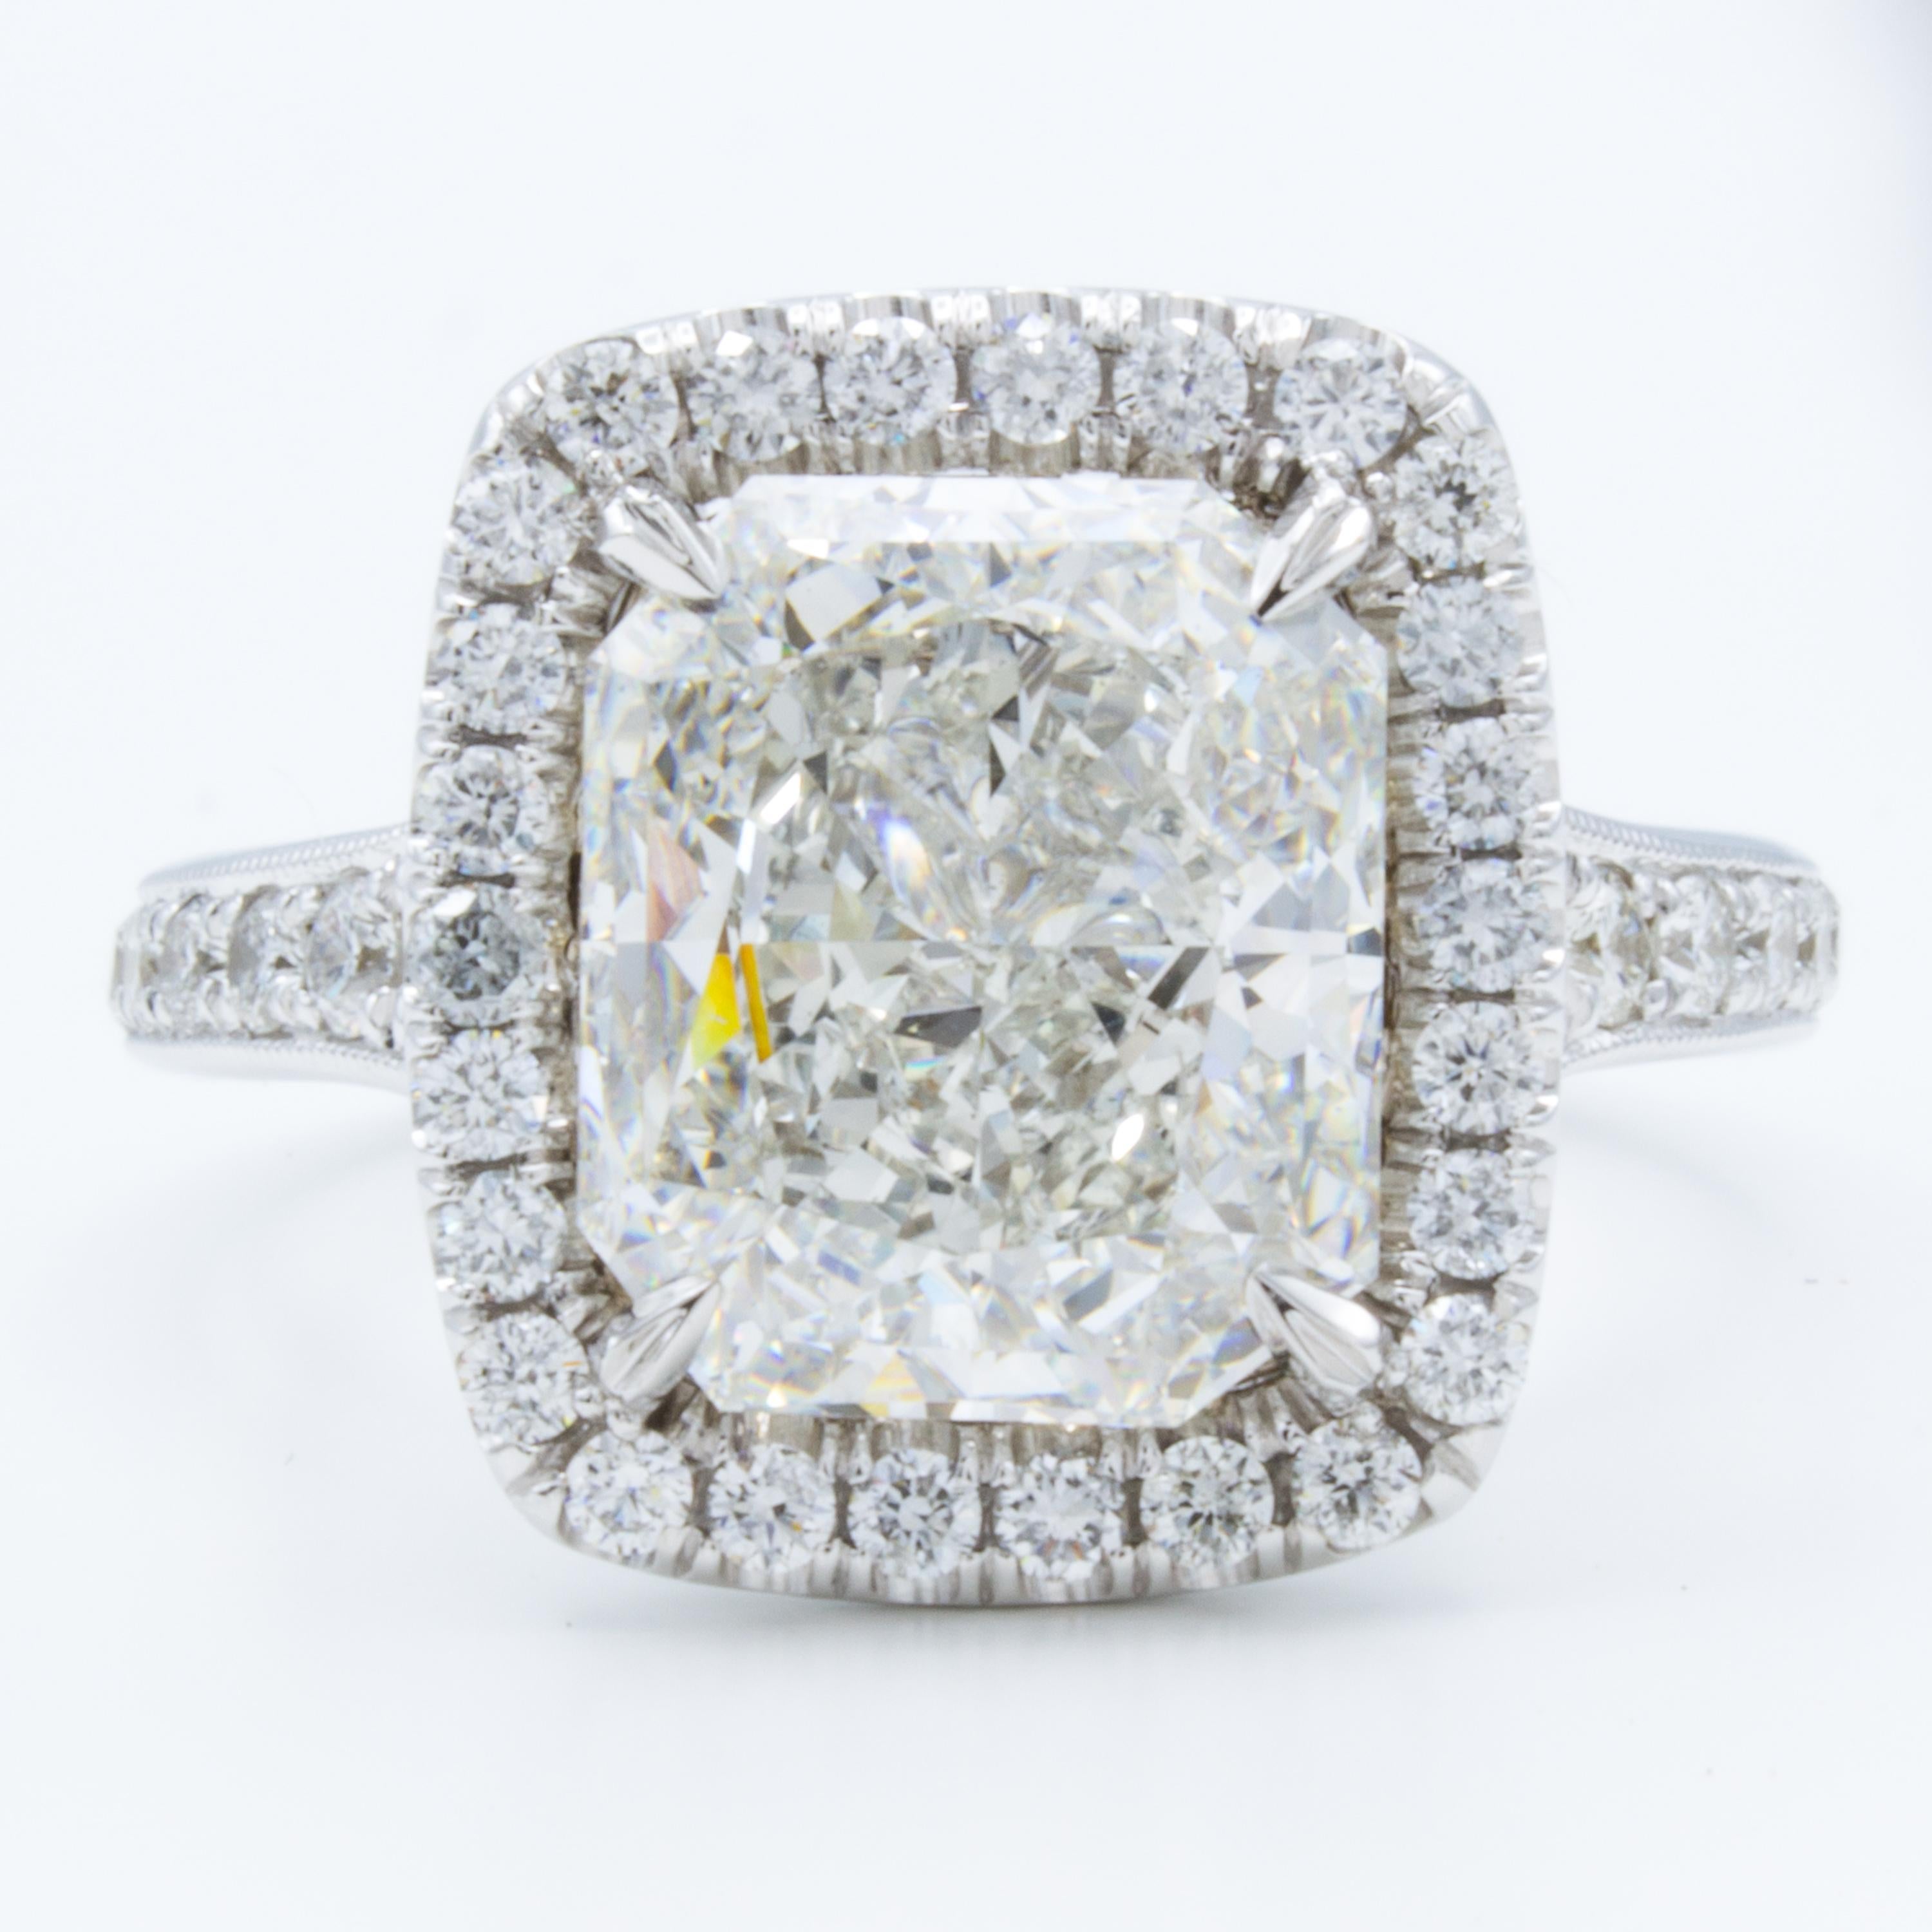 This Rosenberg Diamonds & Co. engagement ring displays a brilliant GIA certified 4.04 carat radiant cut diamond embraced by round brilliant pave diamond accents. The 18kt white gold setting shines with further round brilliant diamond accents and a